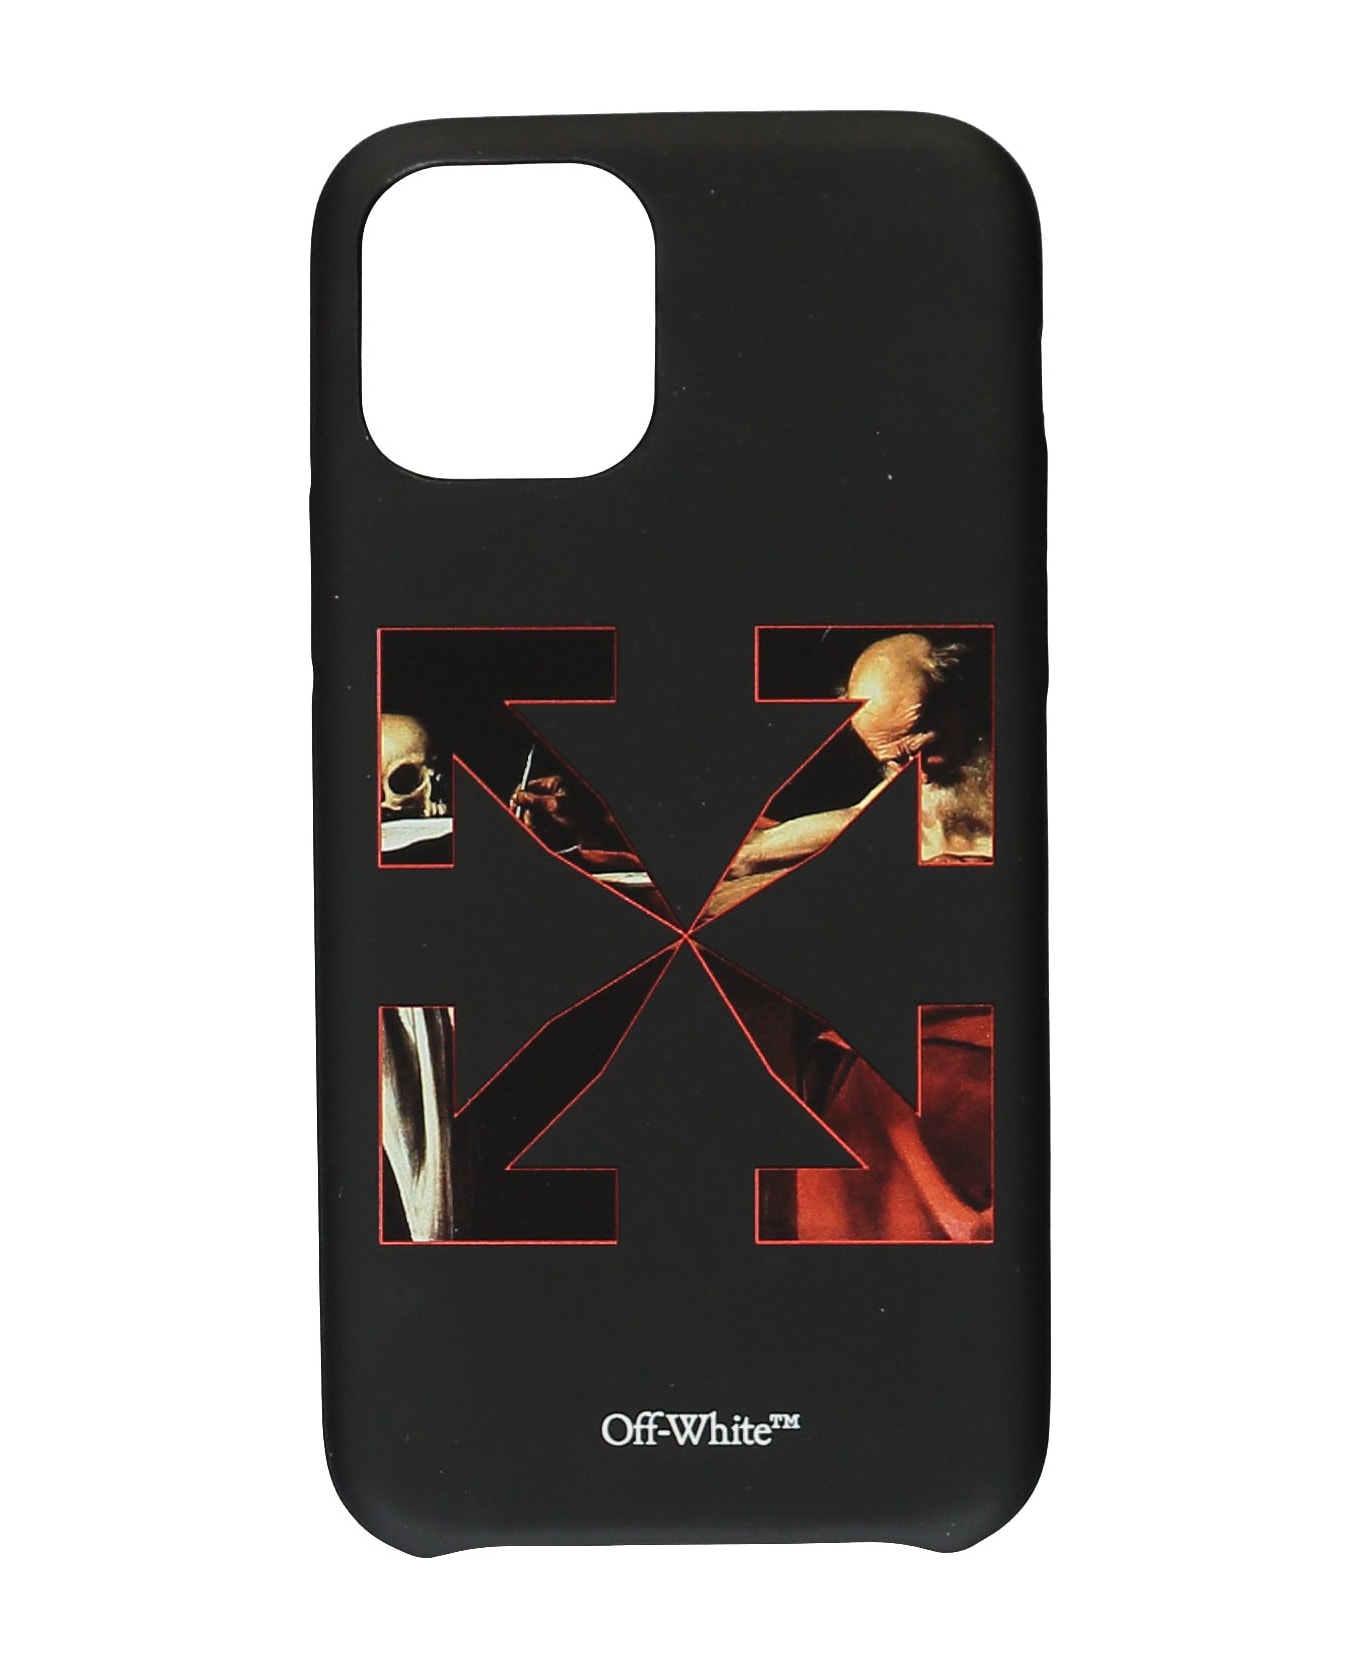 Off-White Printed Iphone 11 Pro Case - black